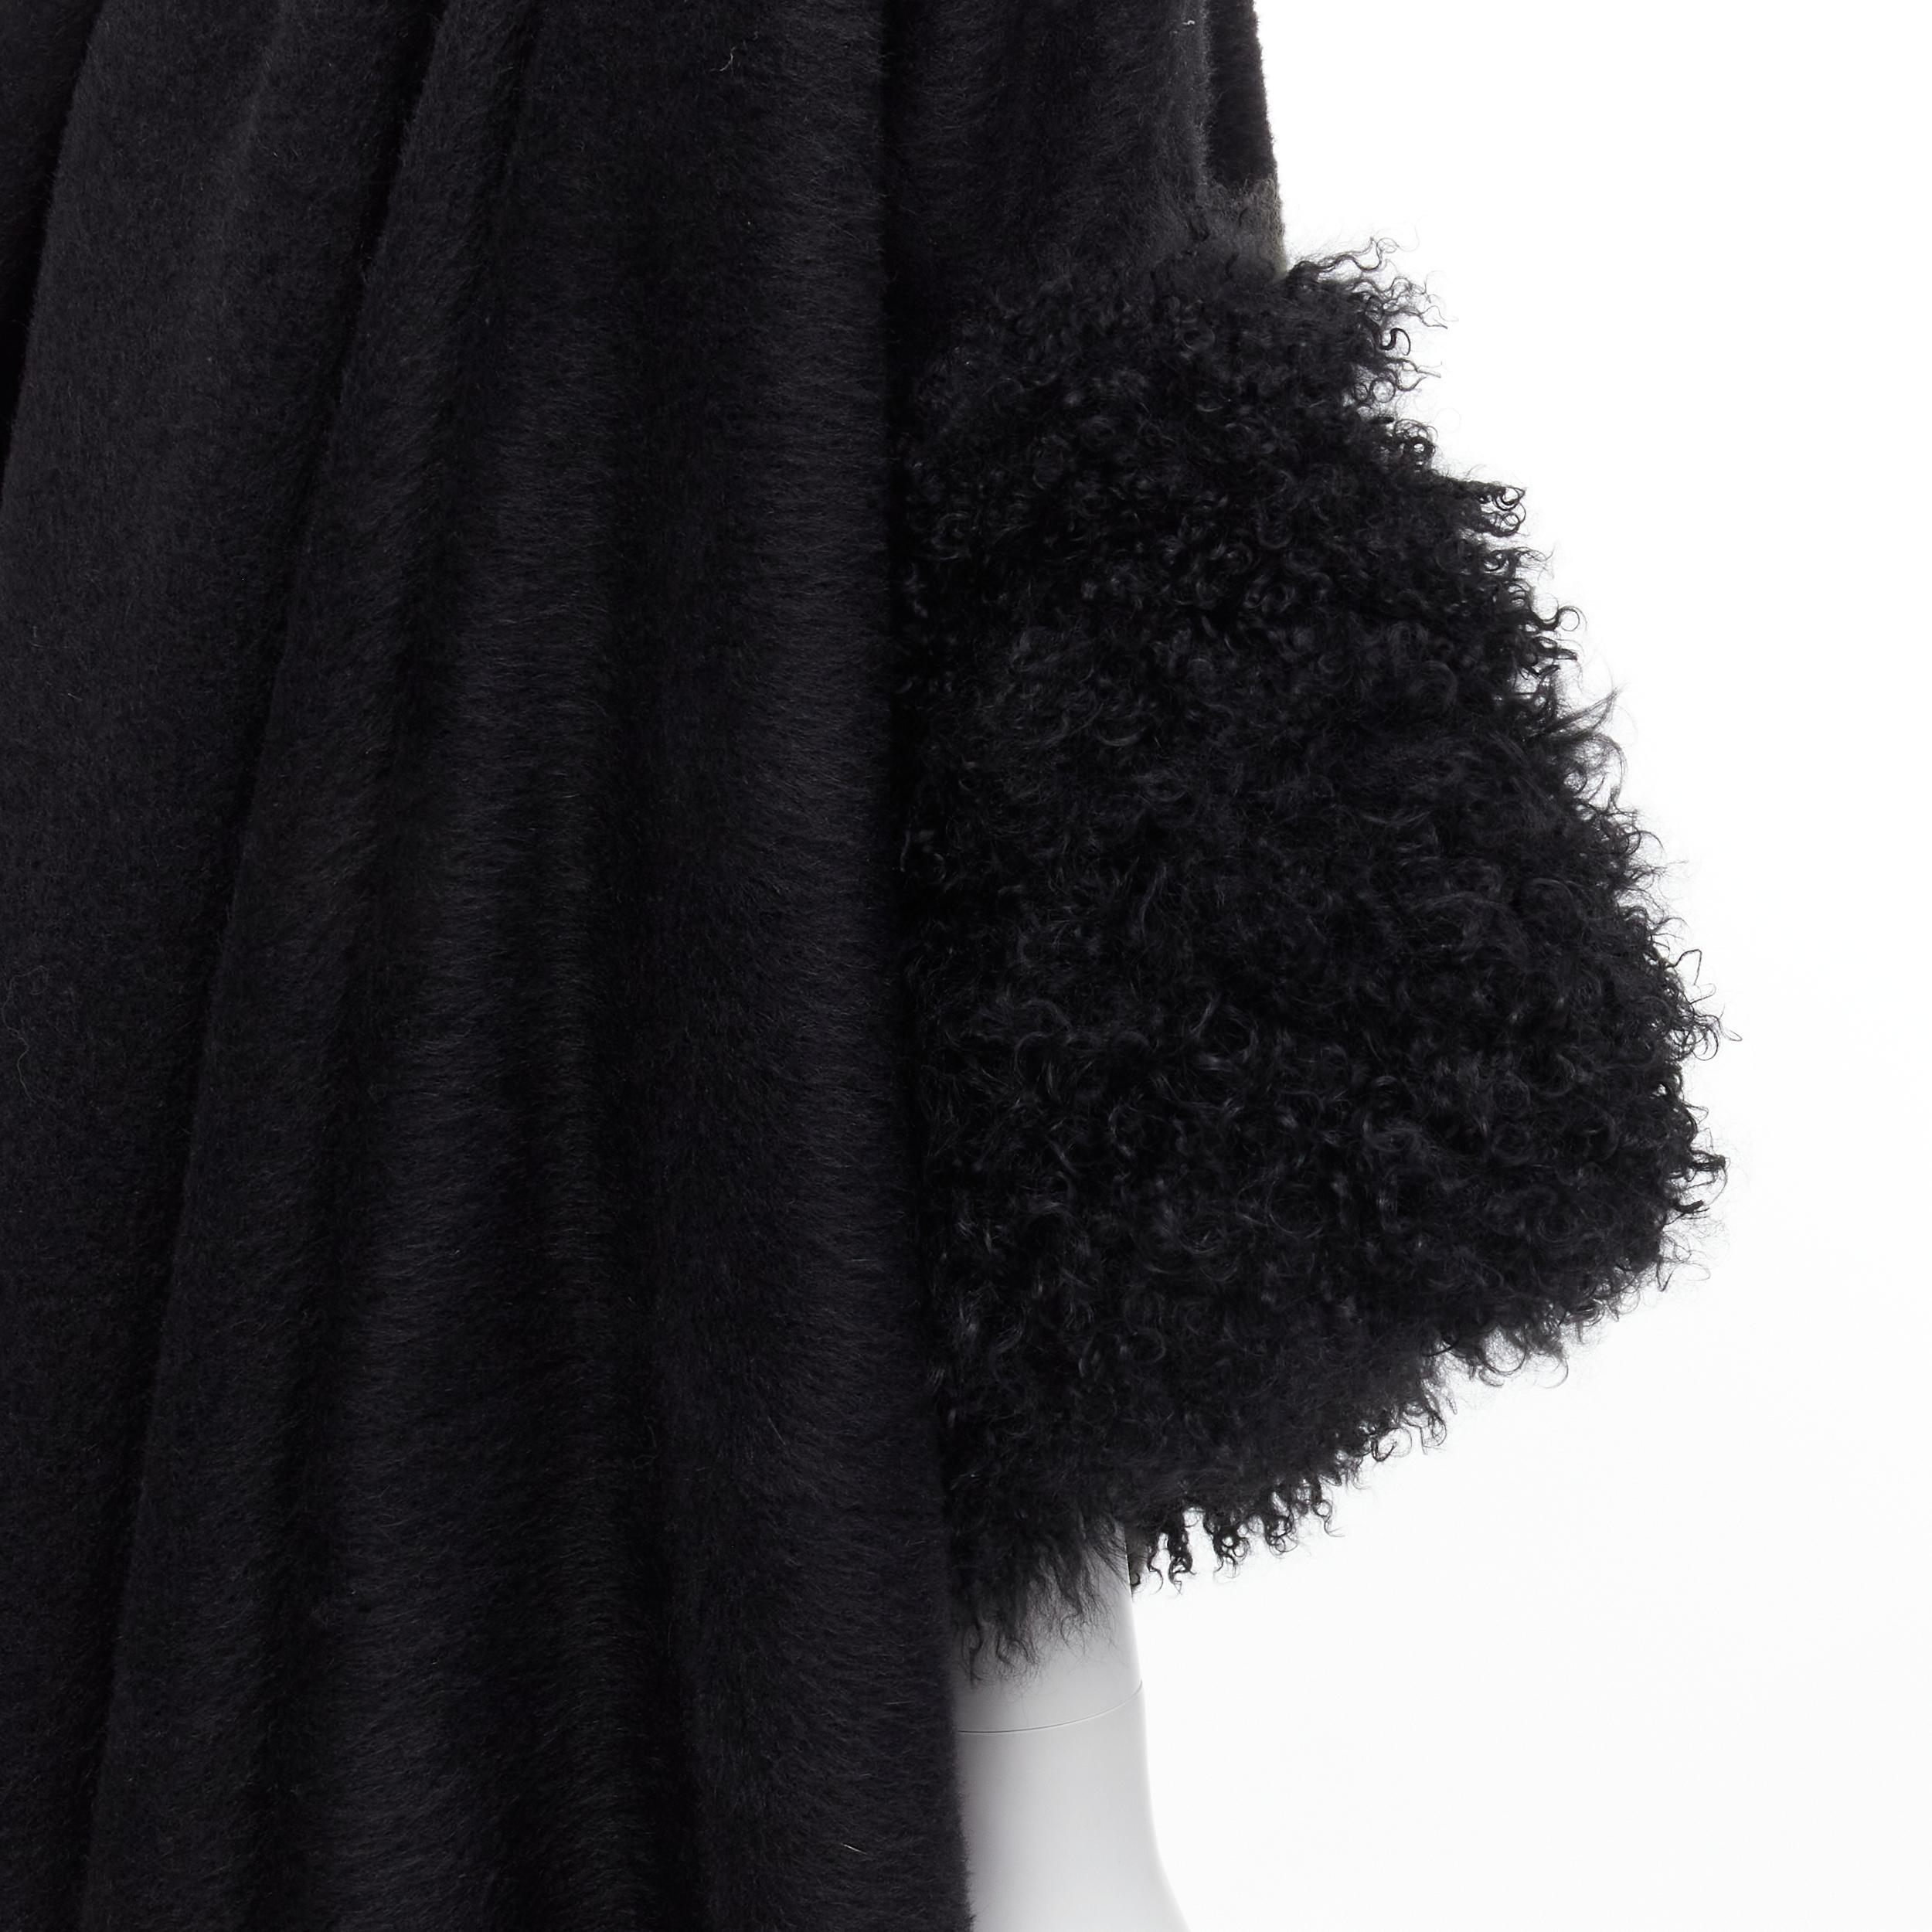 YOHJI YAMAMOTO black brushed wool shearling cuff draped cocoon coat S 
Reference: CRTI/A00547 
Brand: Yohji Yamamoto 
Material: Wool 
Color: Black 
Pattern: Solid 
Extra Detail: Extremely oversized coat. Draped collar. Short sleeve curly shearling